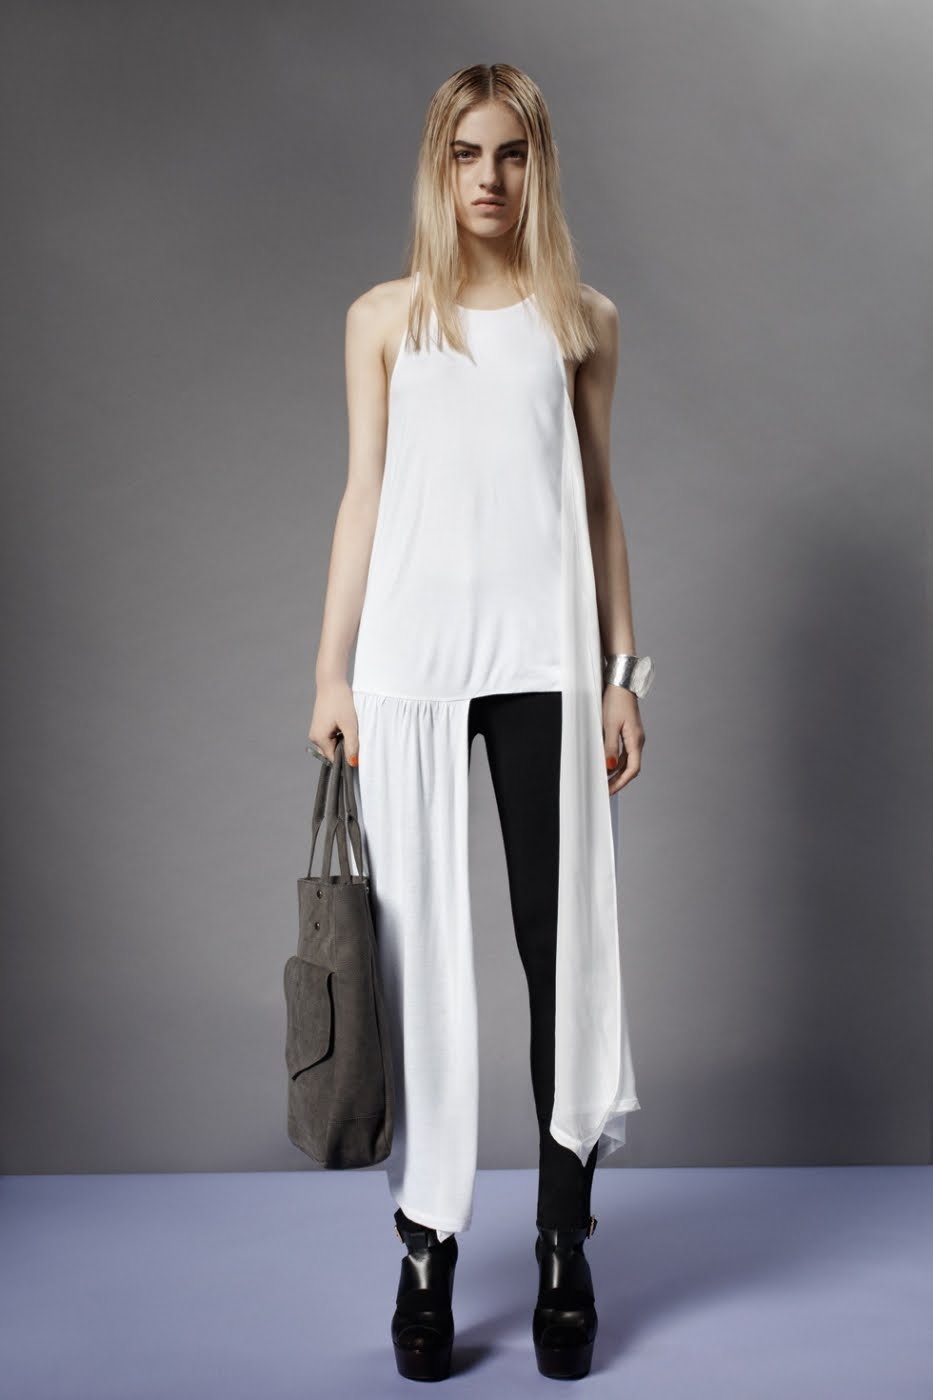 THE STYLE CURATOR: Topshop Spring 2011 Lookbook